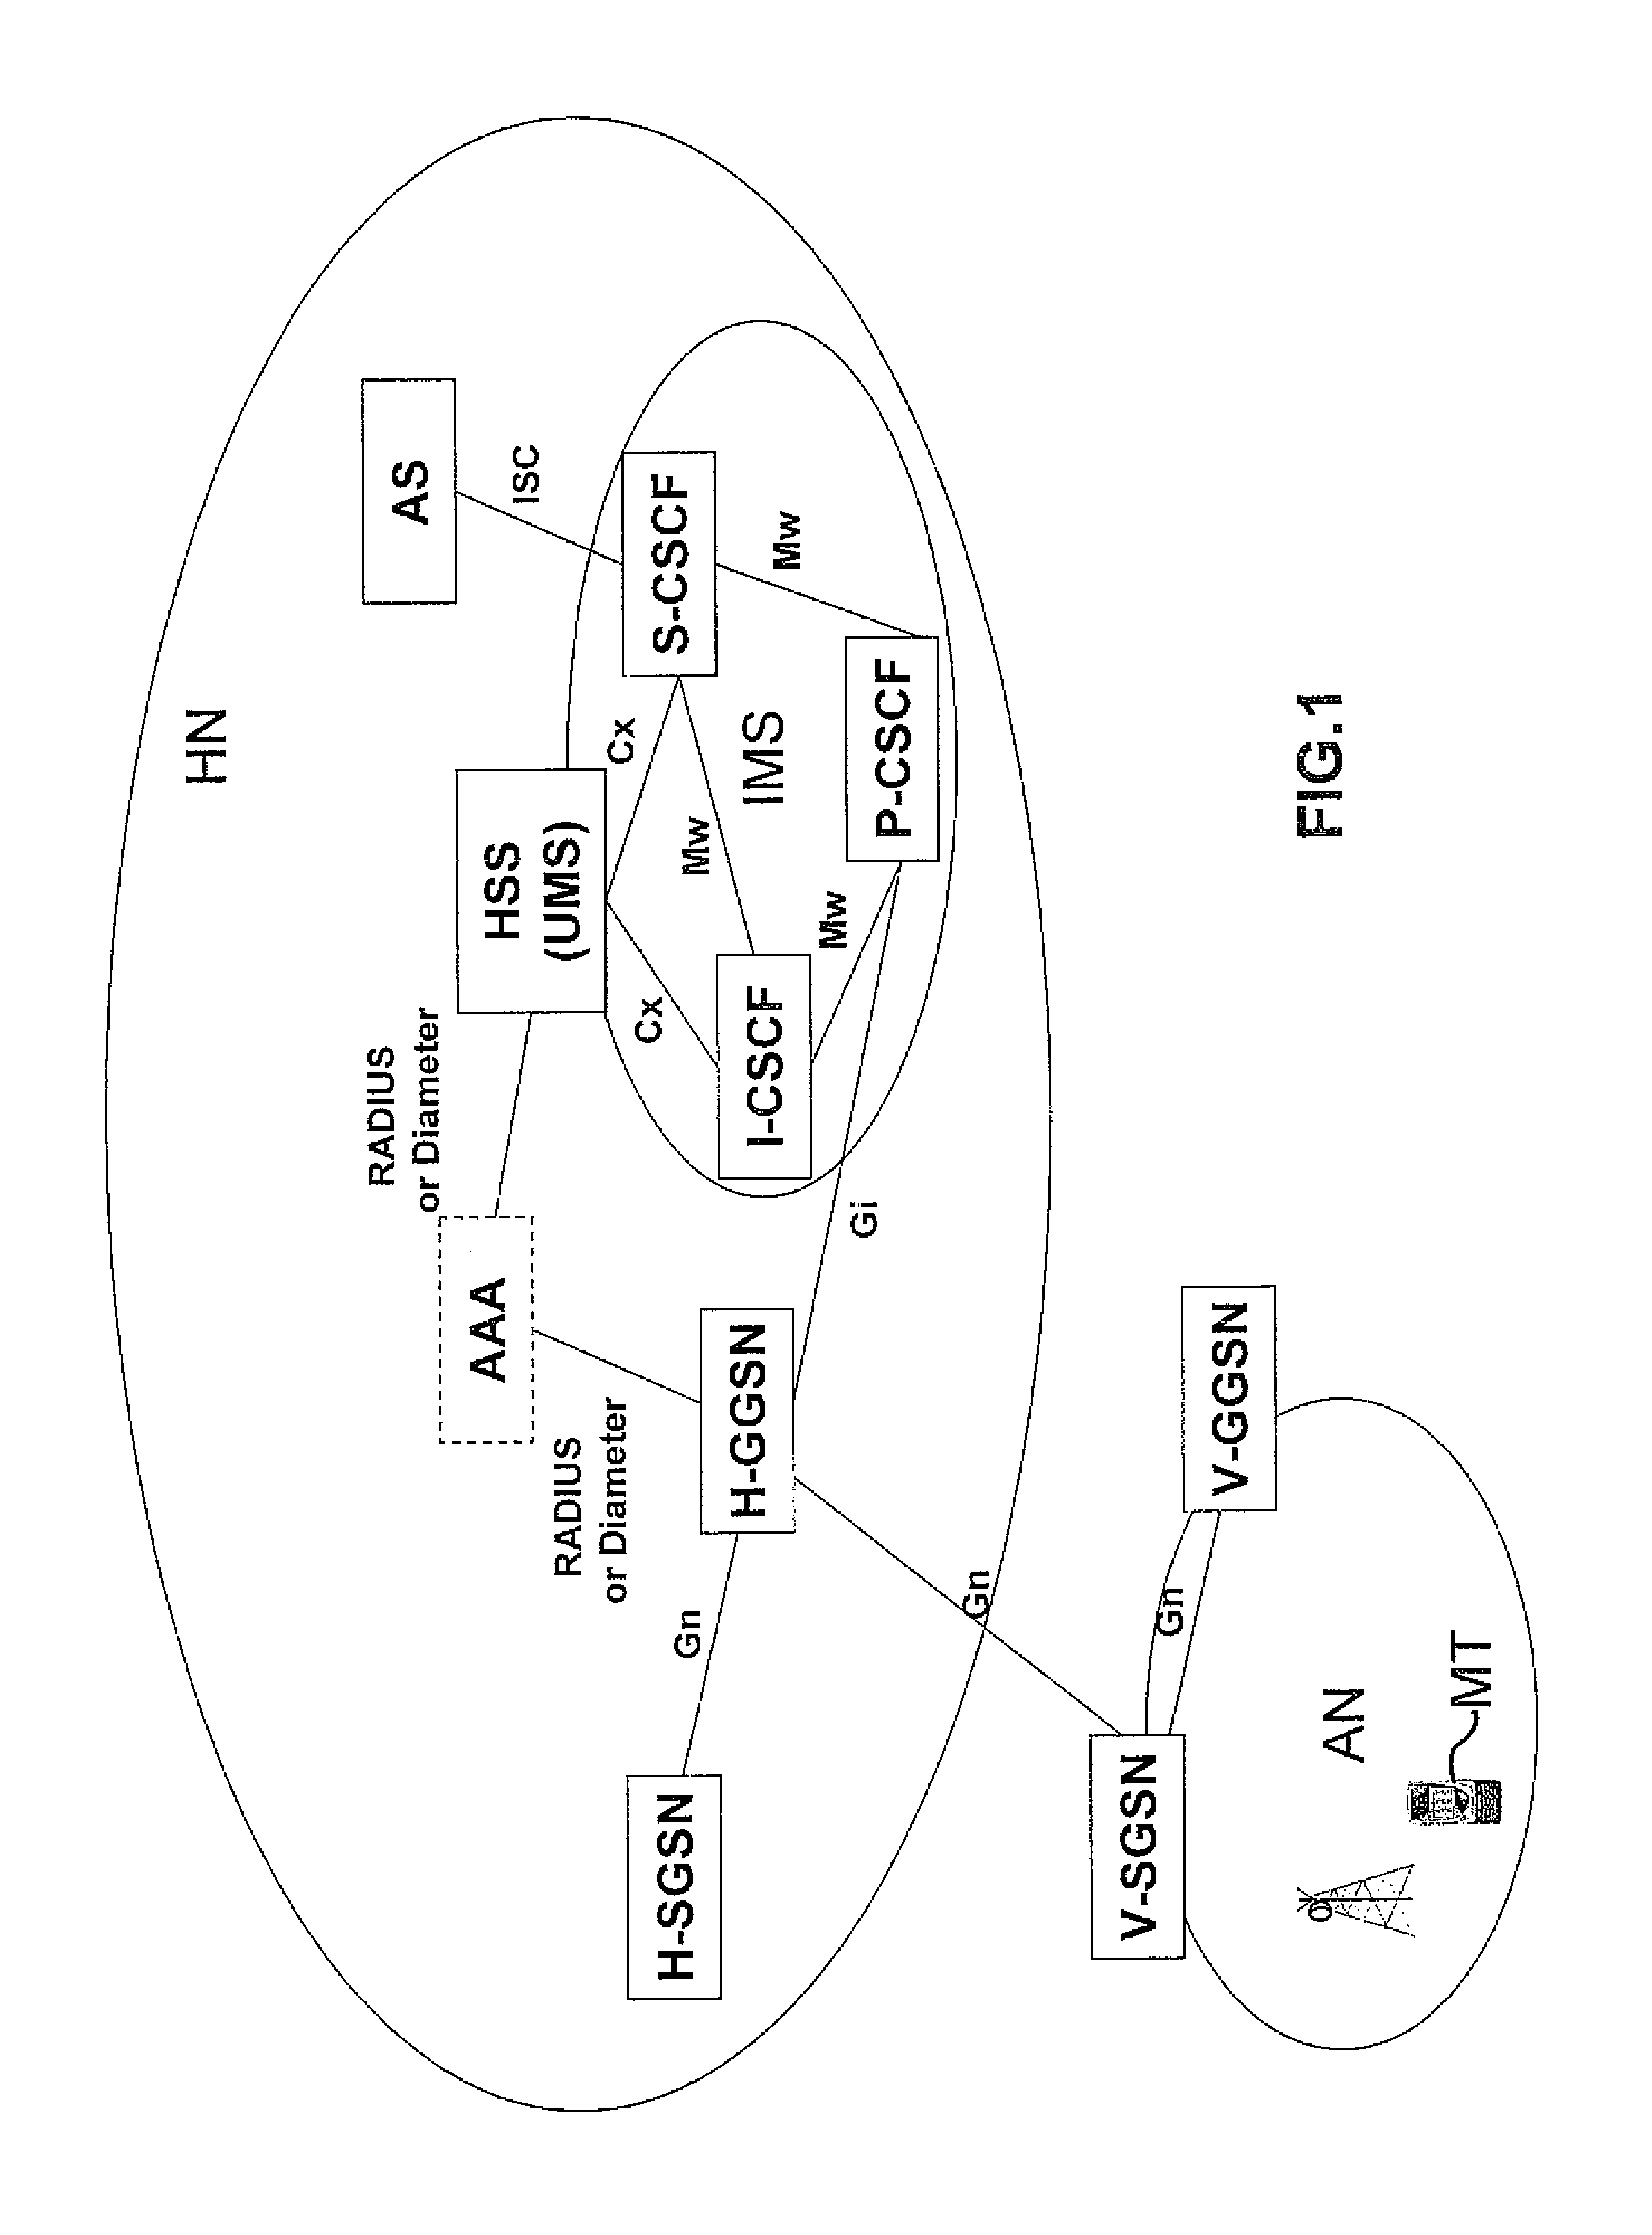 Method of providing access to an IP multimedia subsystem